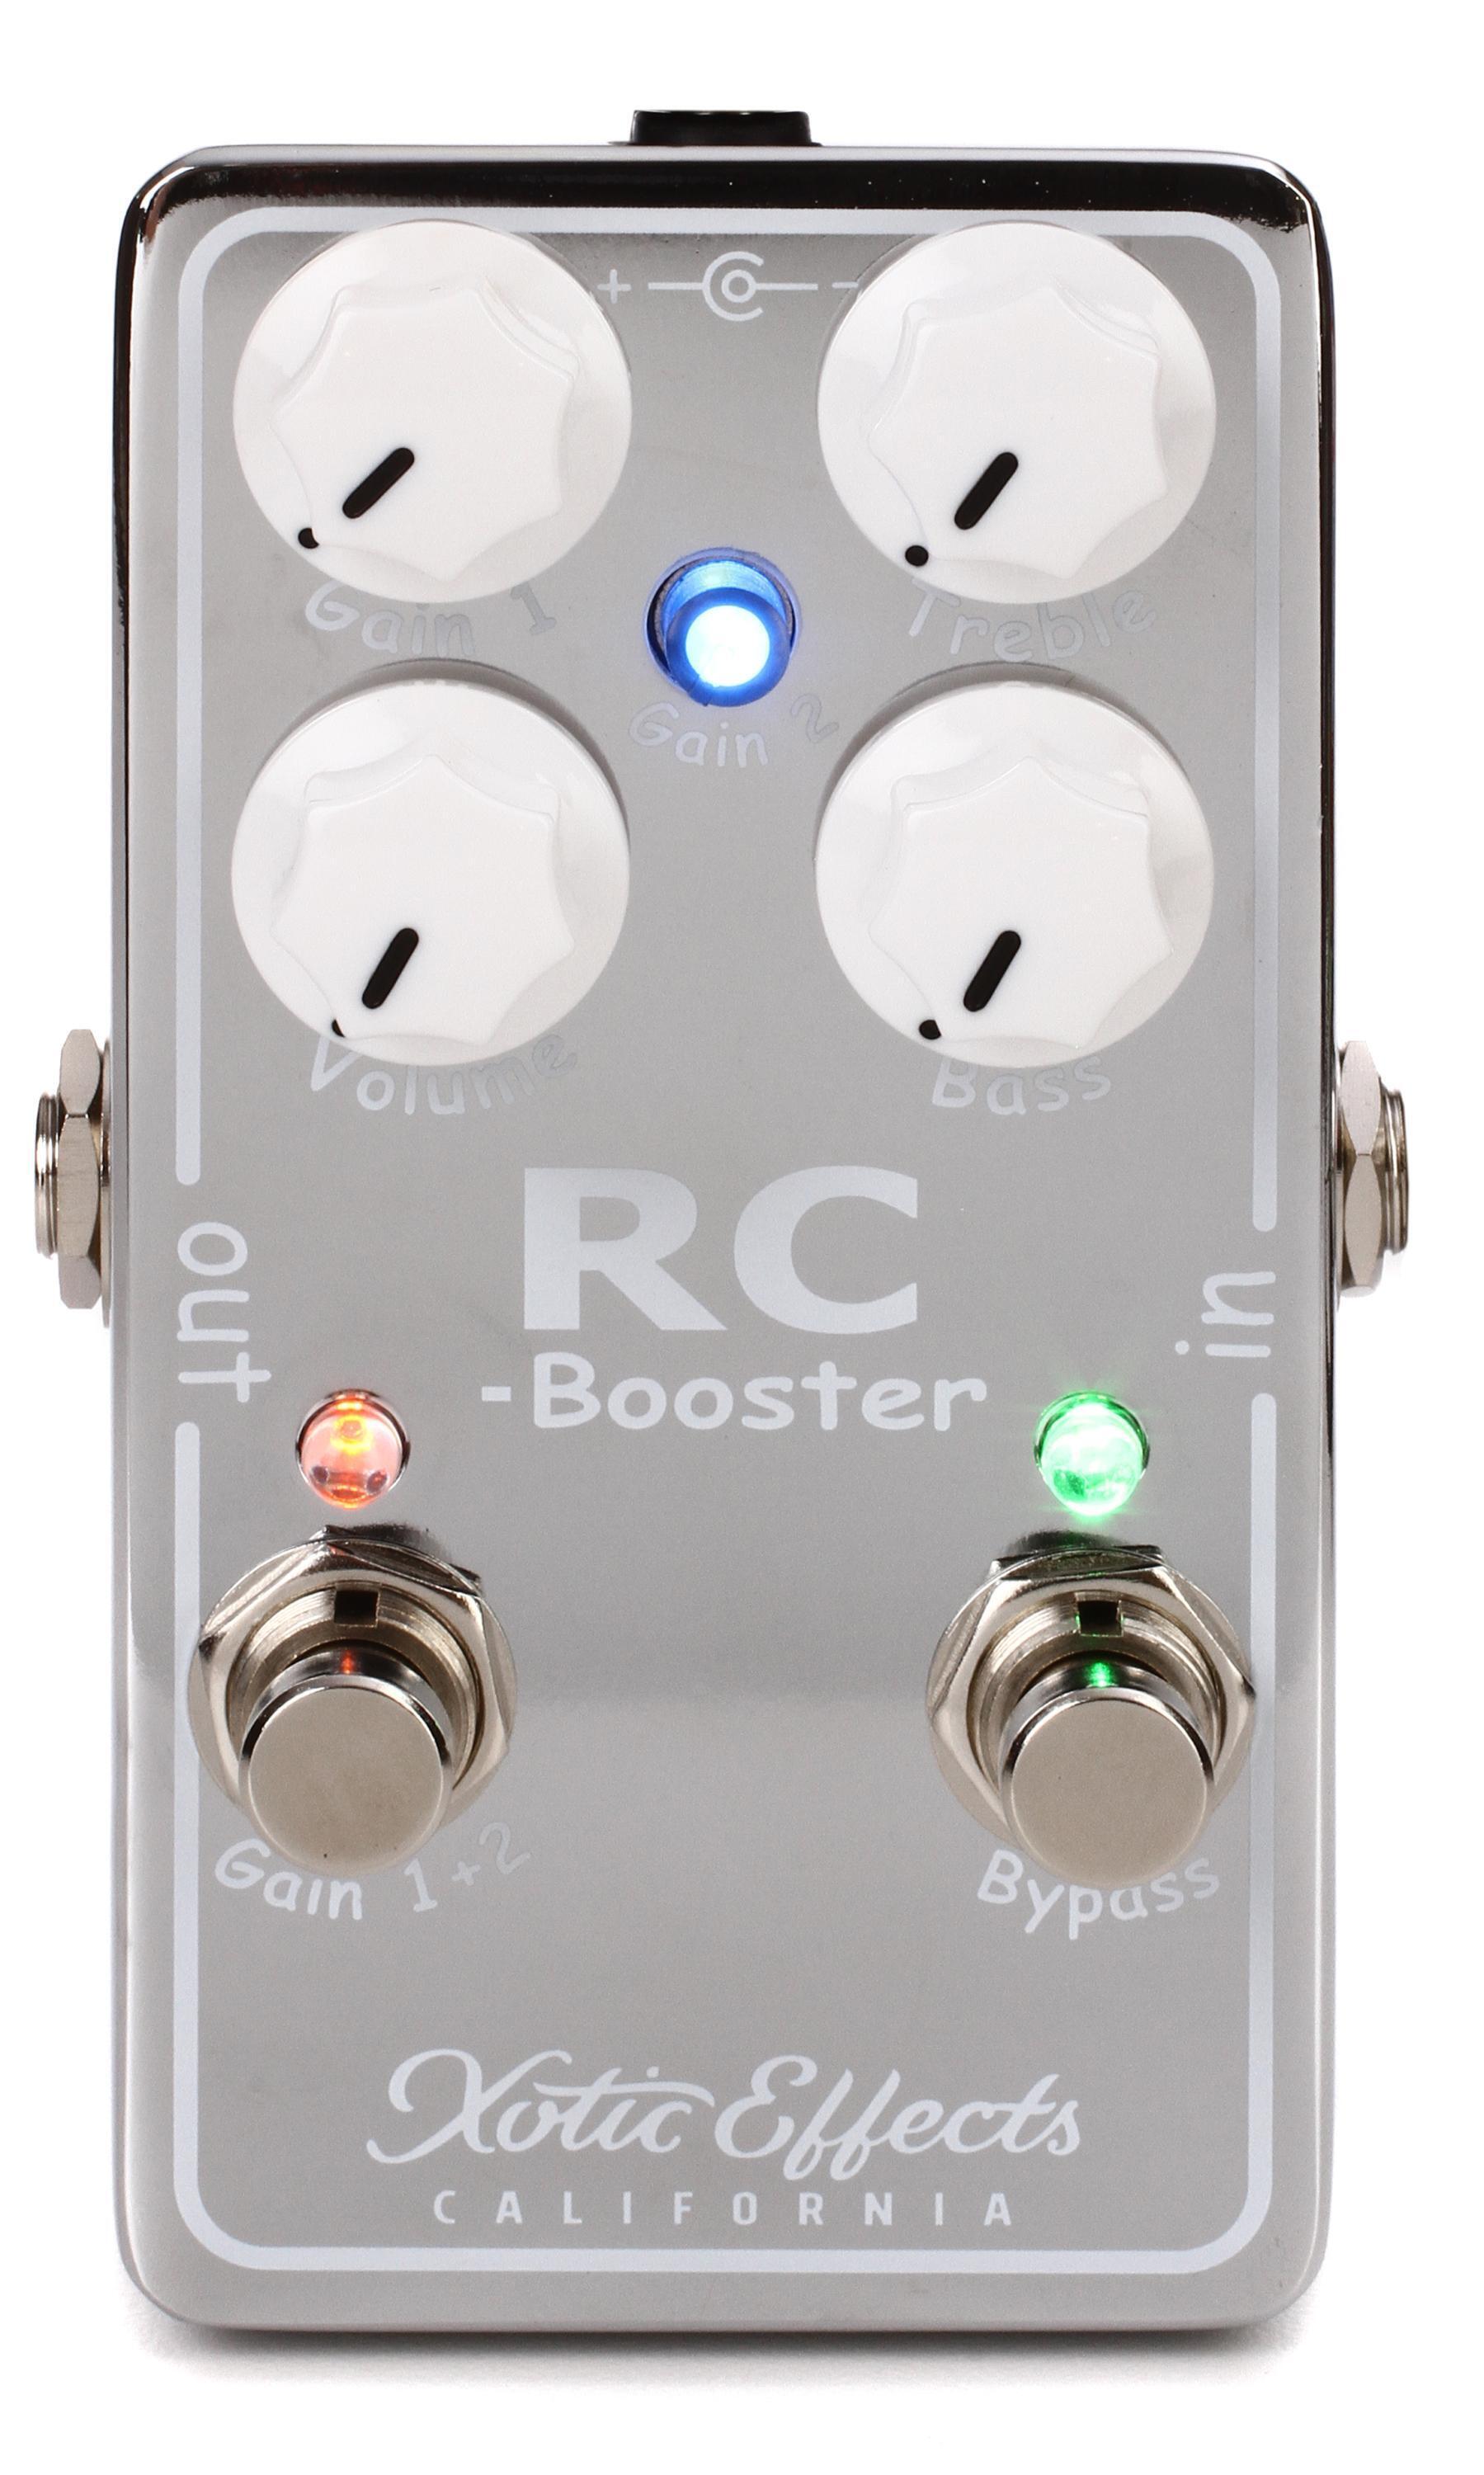 Xotic AC/RC-OZ Booster Pedal | Sweetwater